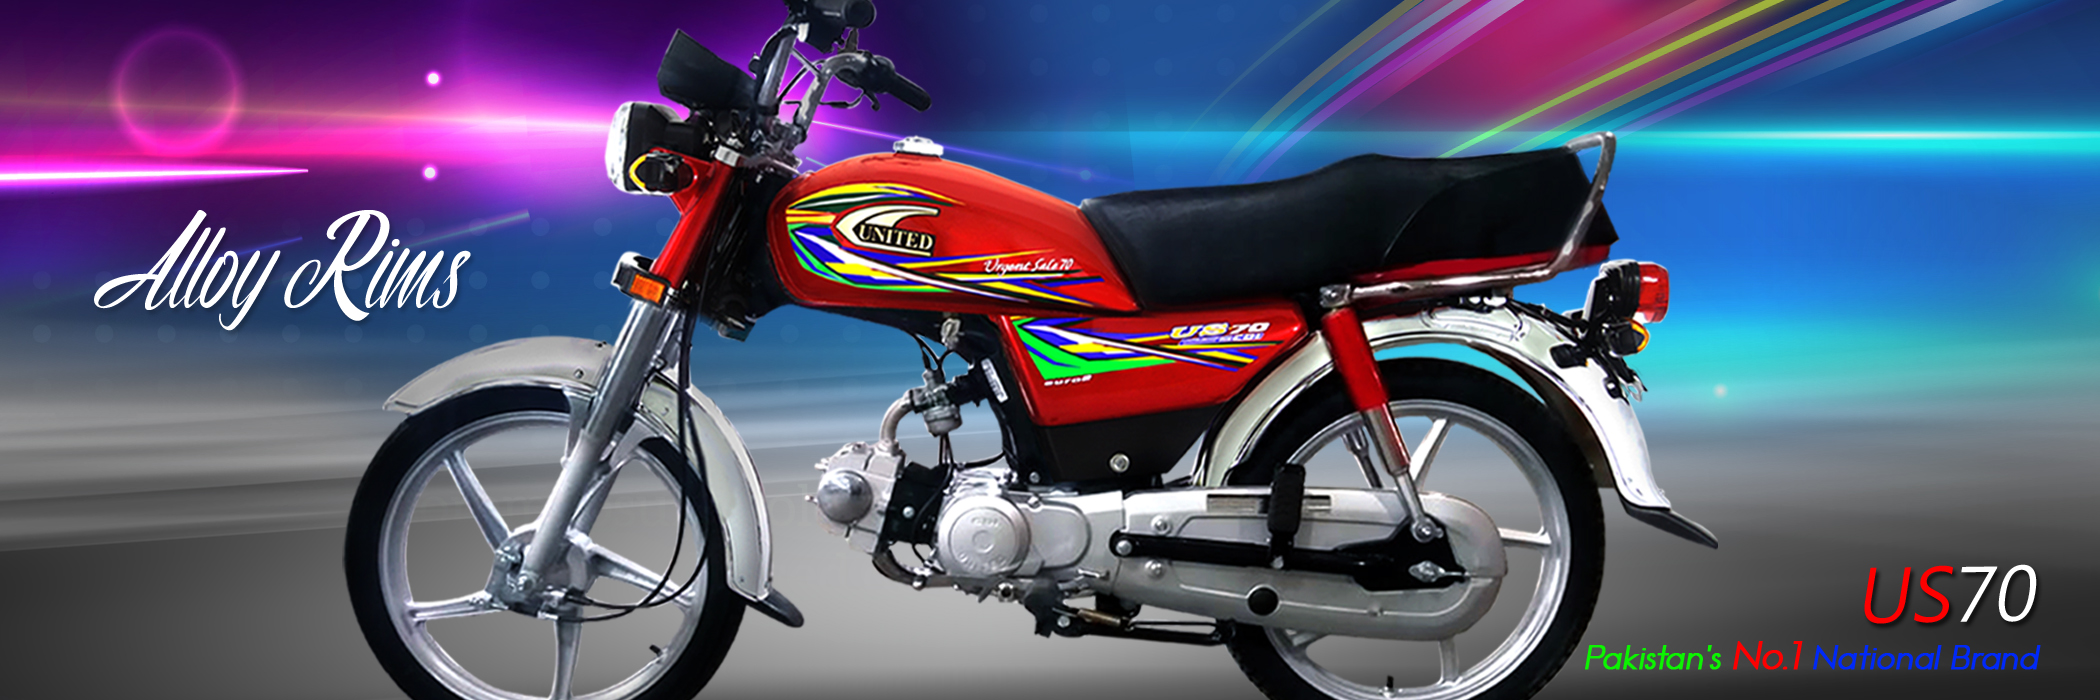 United Motorcycle Pakistan S No 1 National Brand For Further